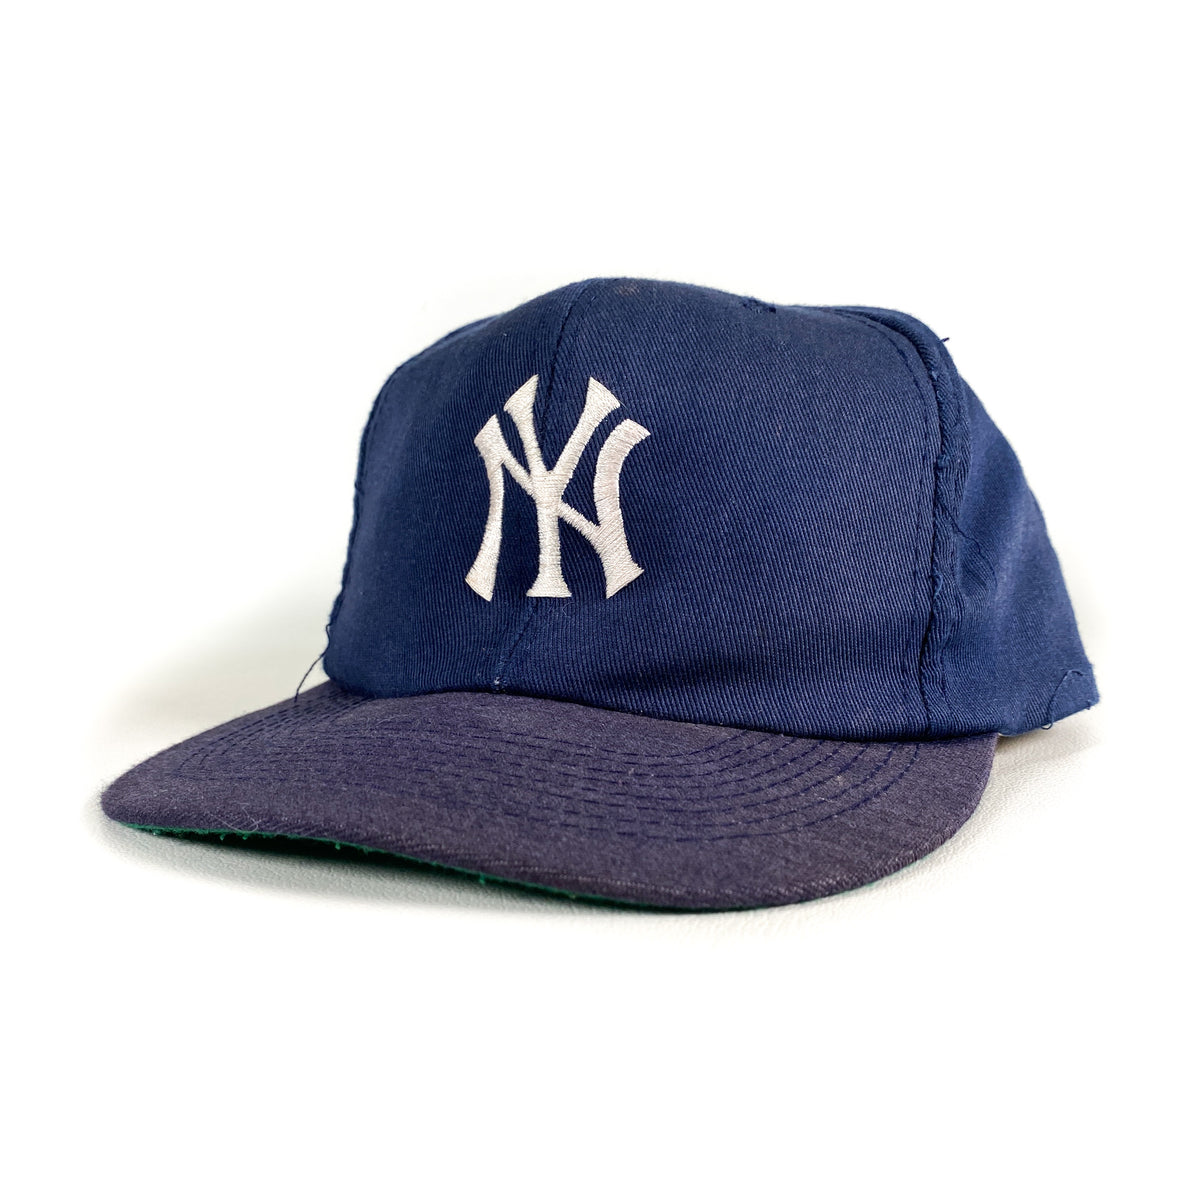 Vintage 90's New York Yankees Autographed Annco Snapback Hat 